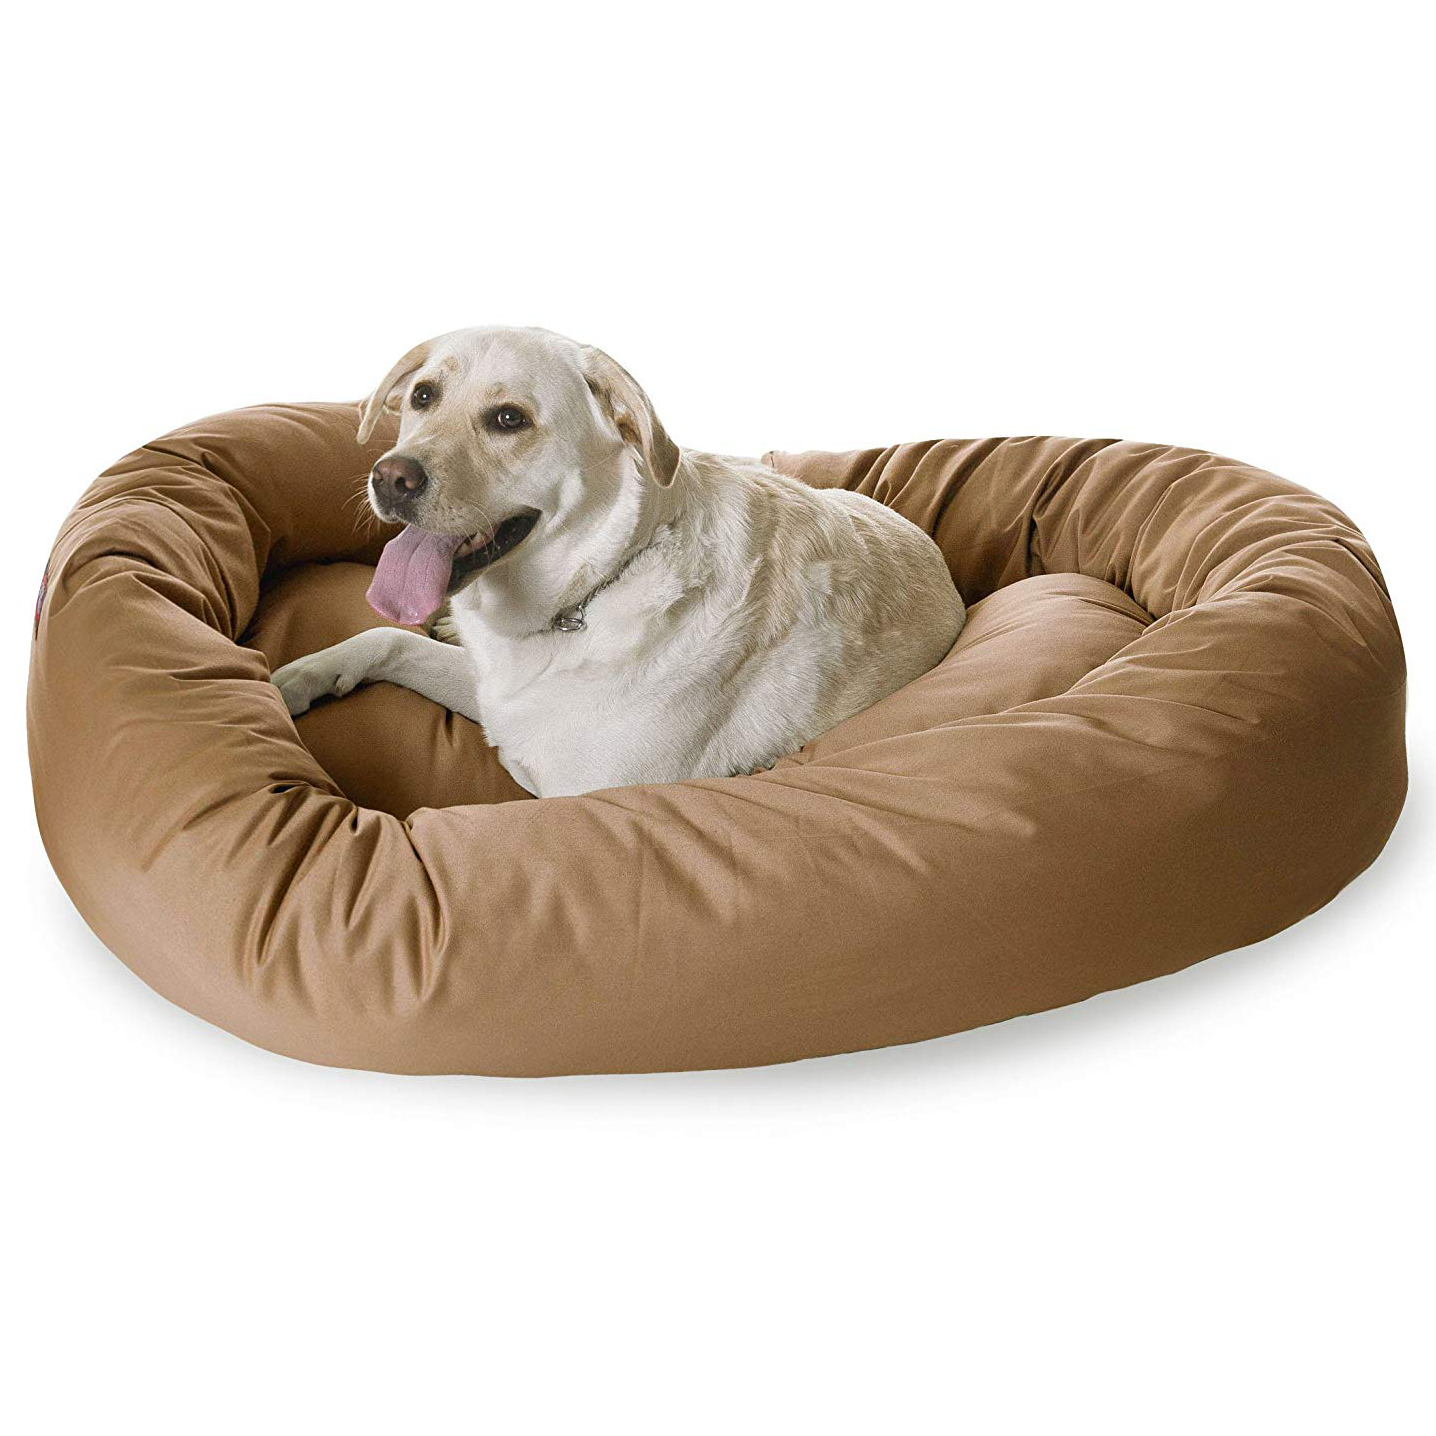 Majestic Pet Poly/Cotton Bagel Pet Bed for Dogs, Calming Dog Bed Washable, Extra Large, Khaki - image 1 of 6